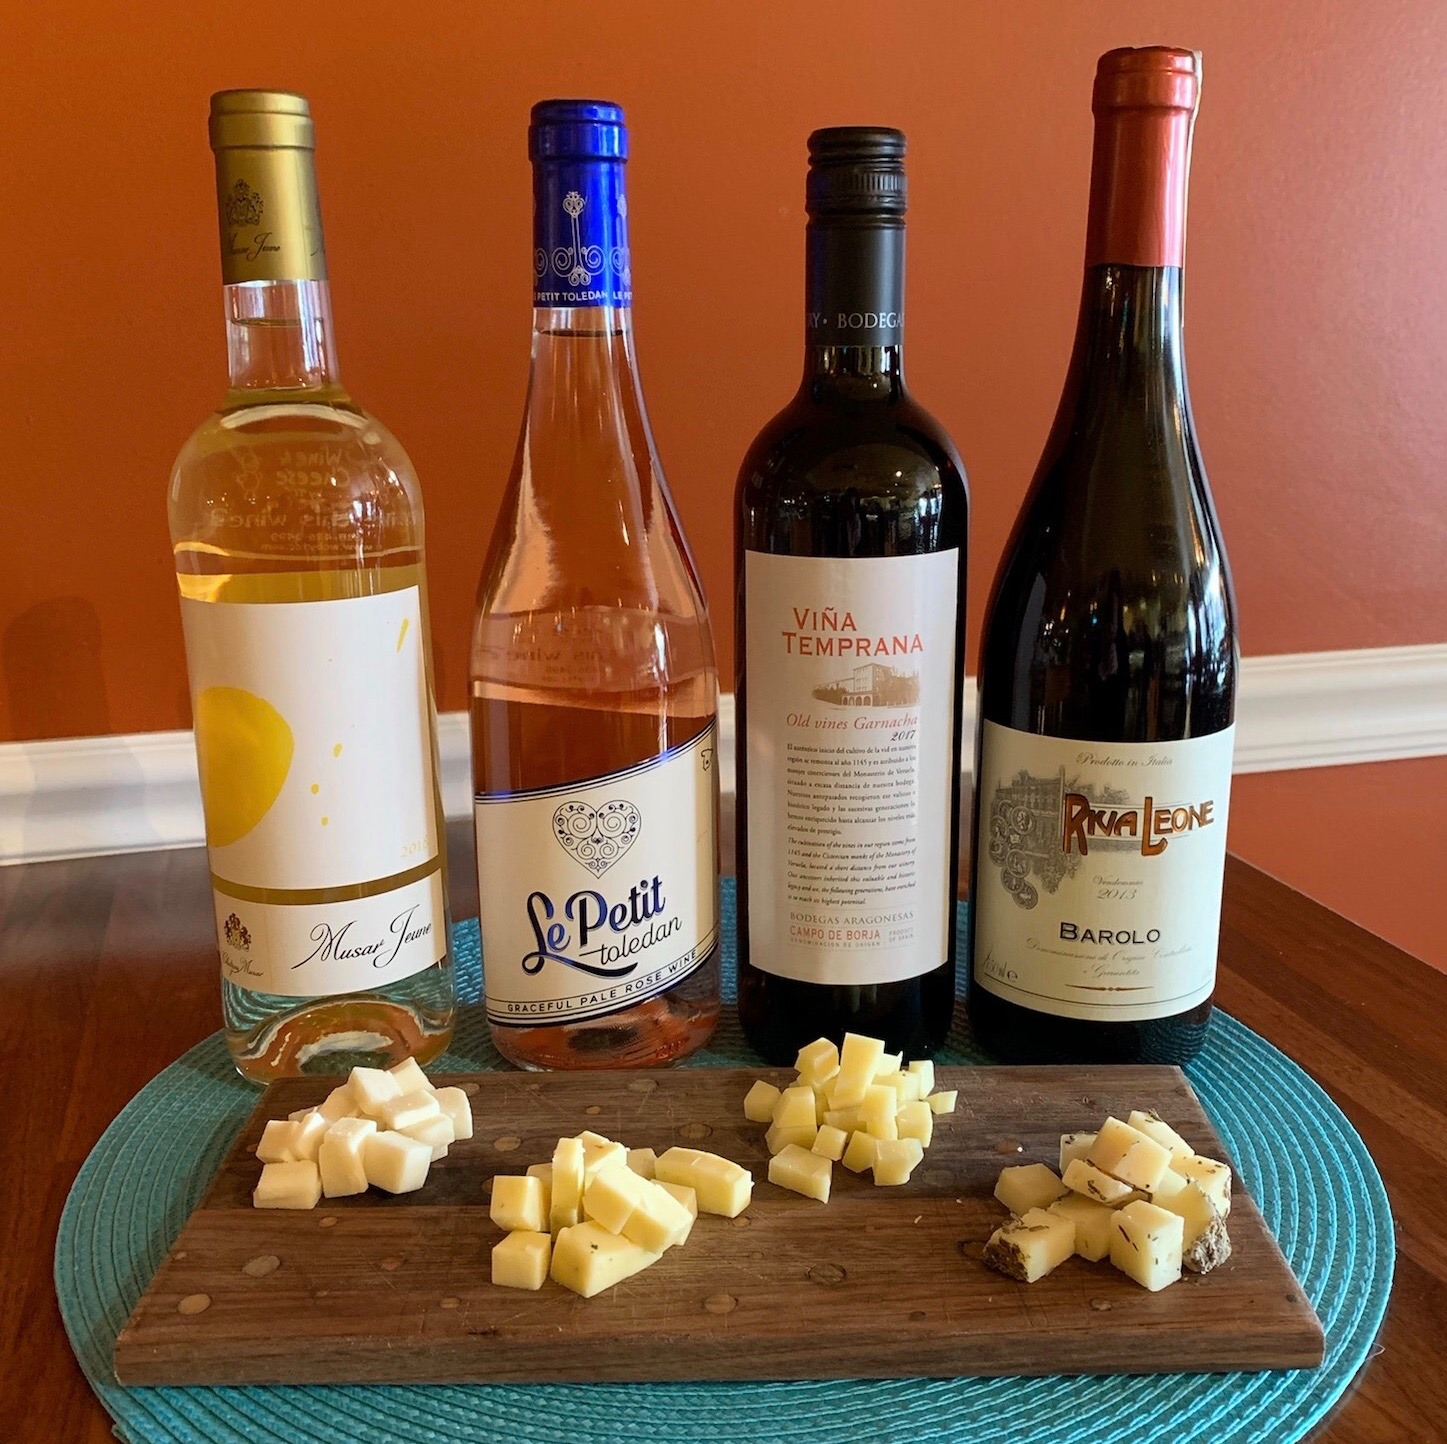 4 bottles of wine next to a board of cut up cheese